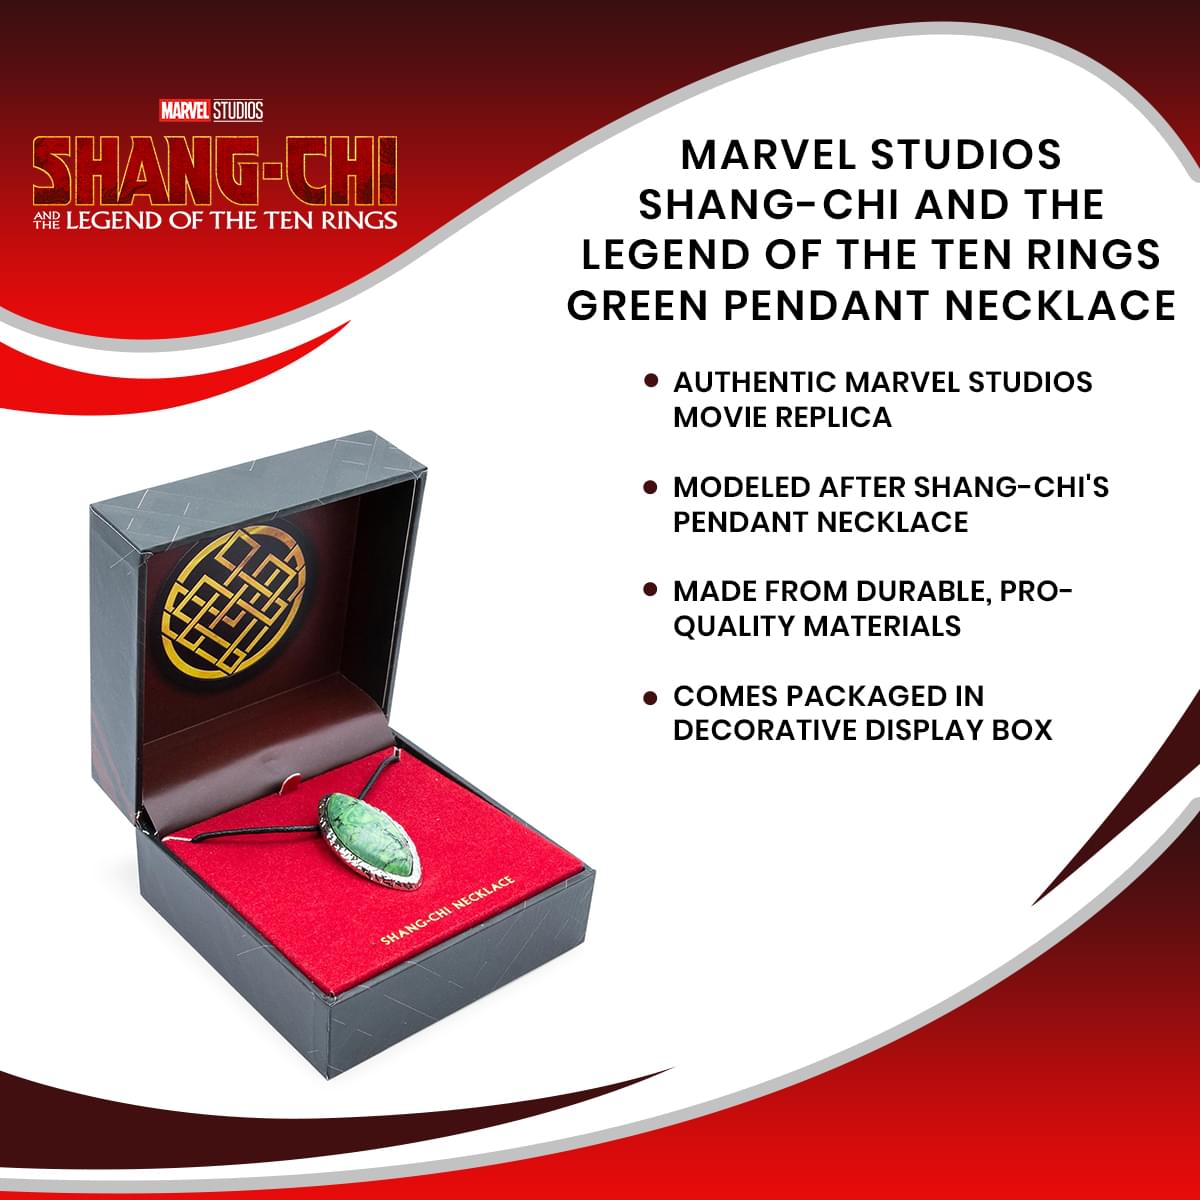 Marvel Studios Shang-Chi and the Legend of the Ten Rings Green Pendant Necklace